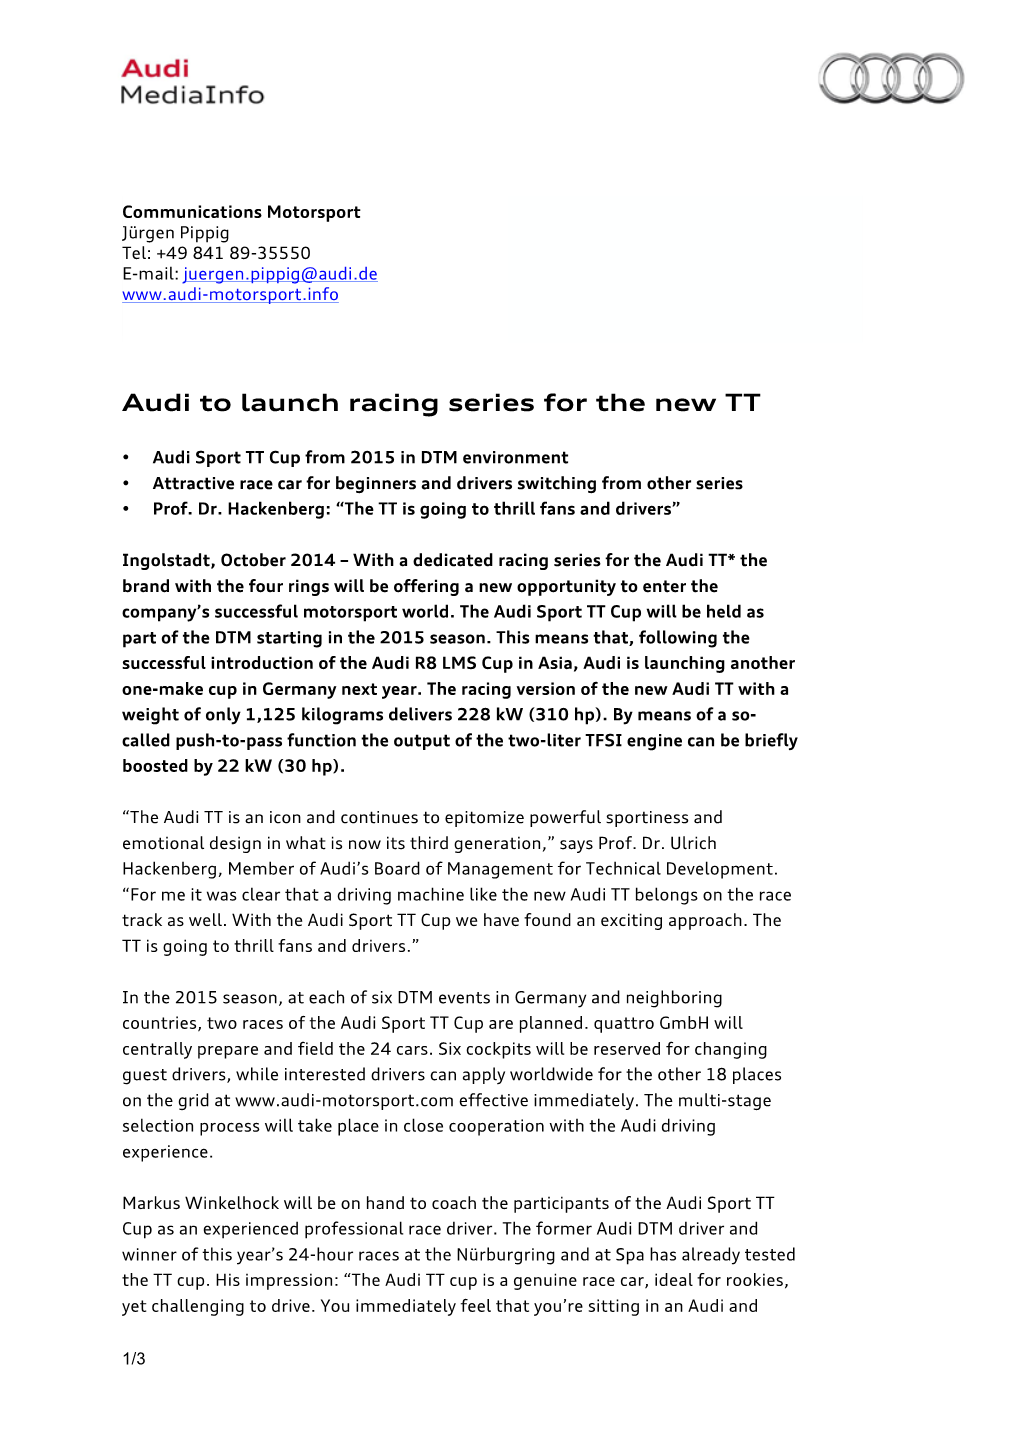 Audi to Launch Racing Series for the New TT